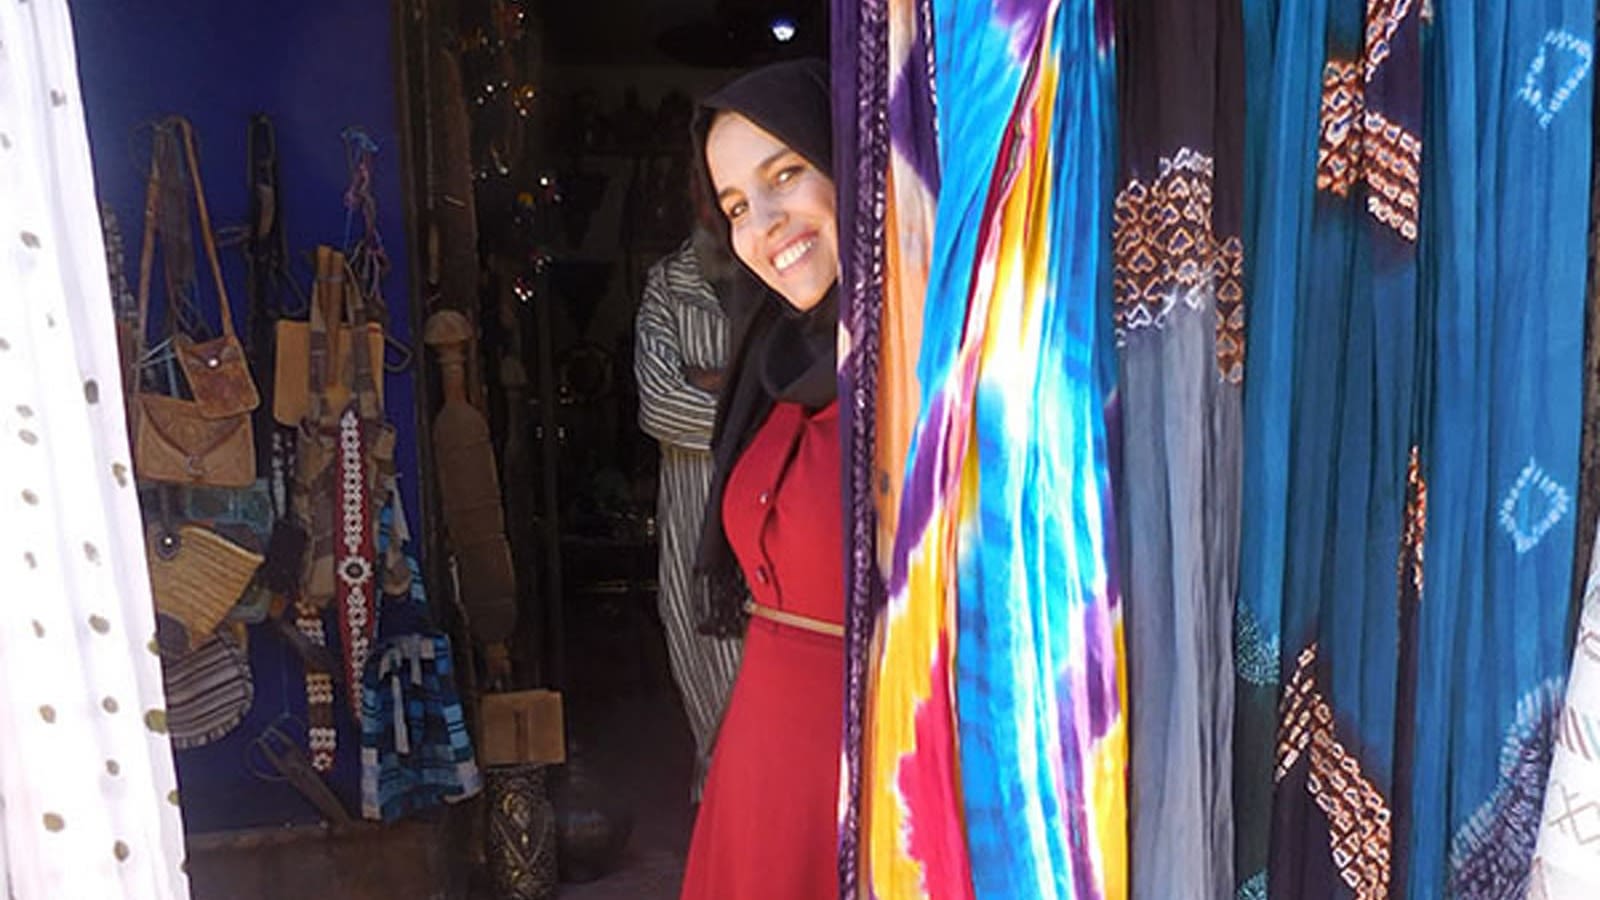 Woman wearing hijab and red dress smiling behind a colourful cloth inside her shop